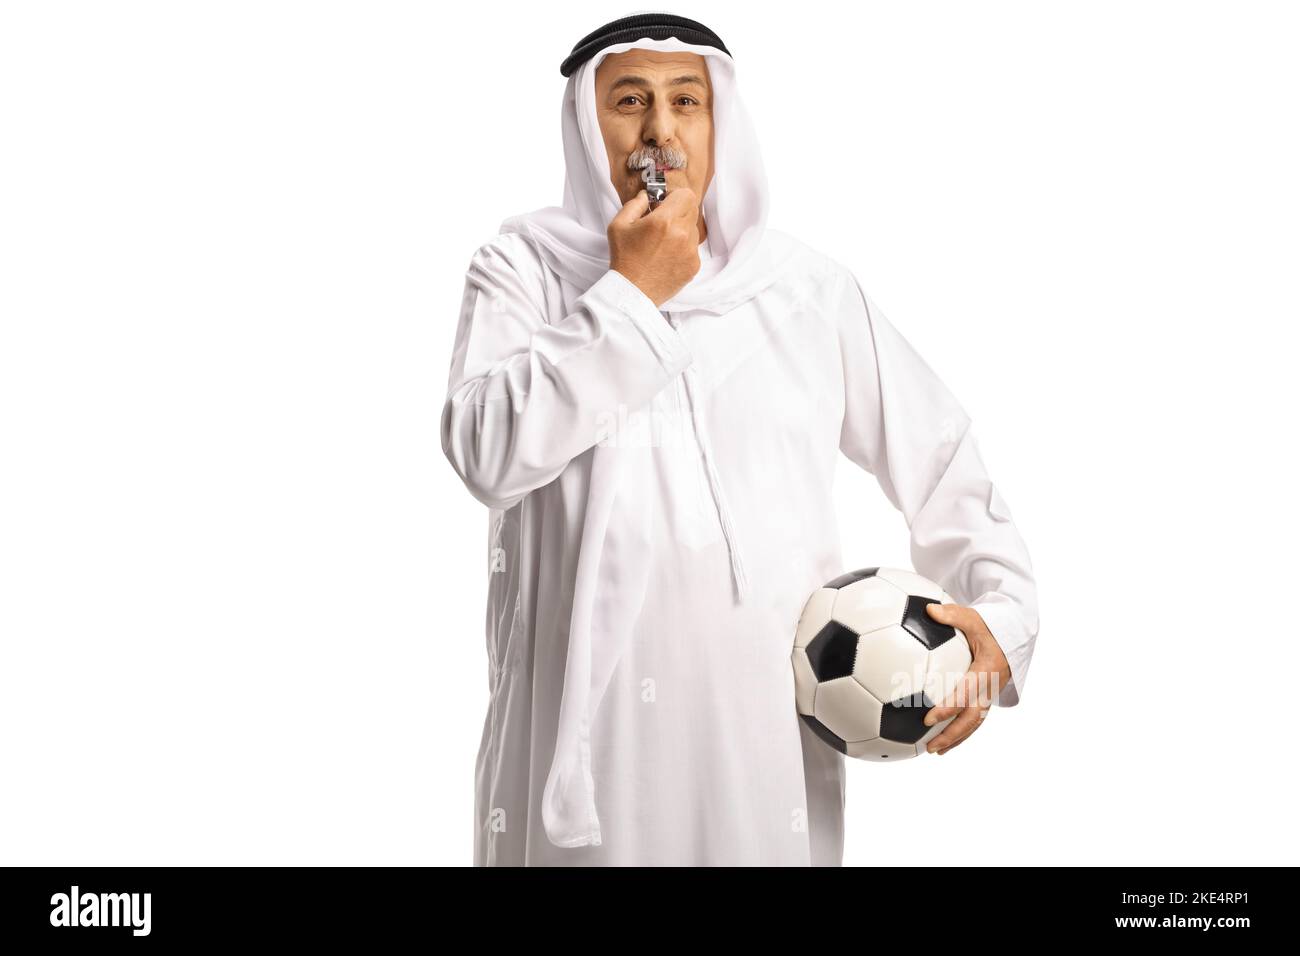 Arab man in ethnic clothes holding a football and blowing a whistle isolated on white background Stock Photo